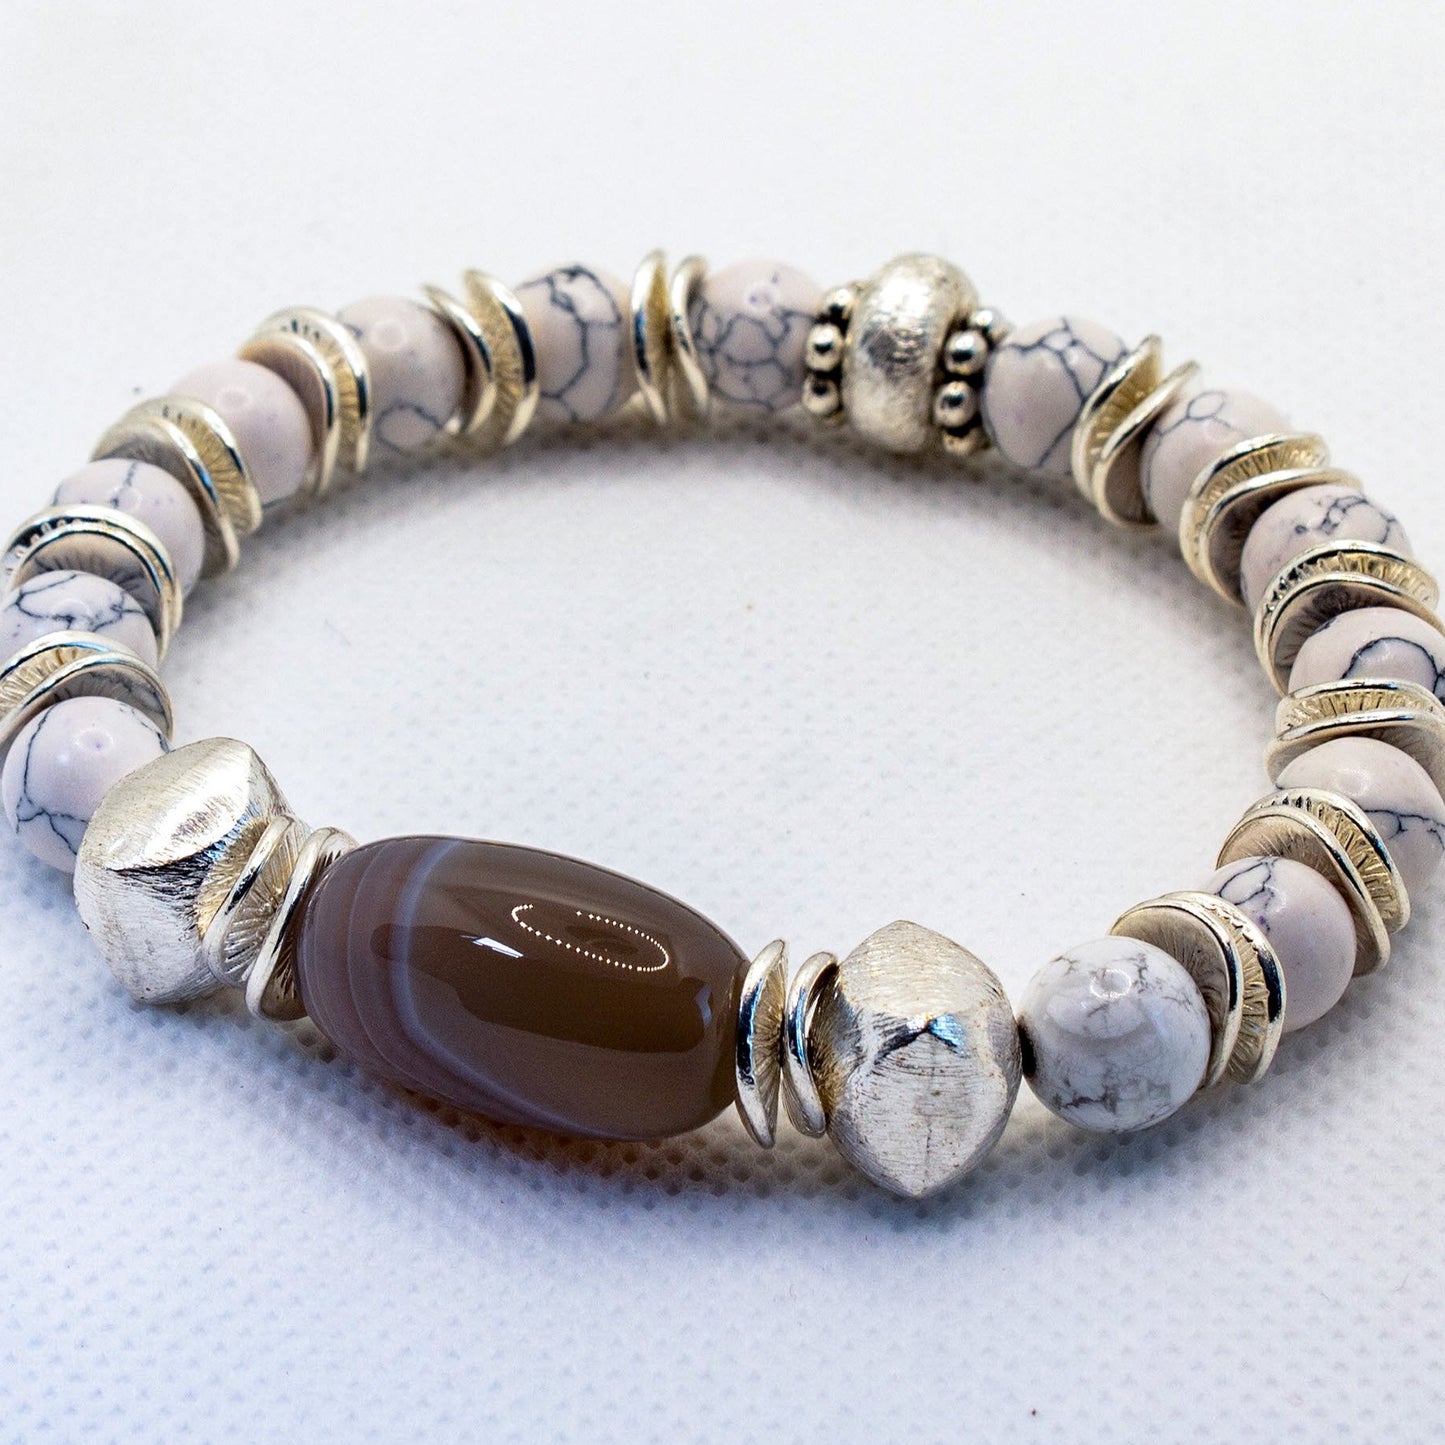 Gray-Striped Agate and White Howlite Beaded Bracelet with Silver Accents